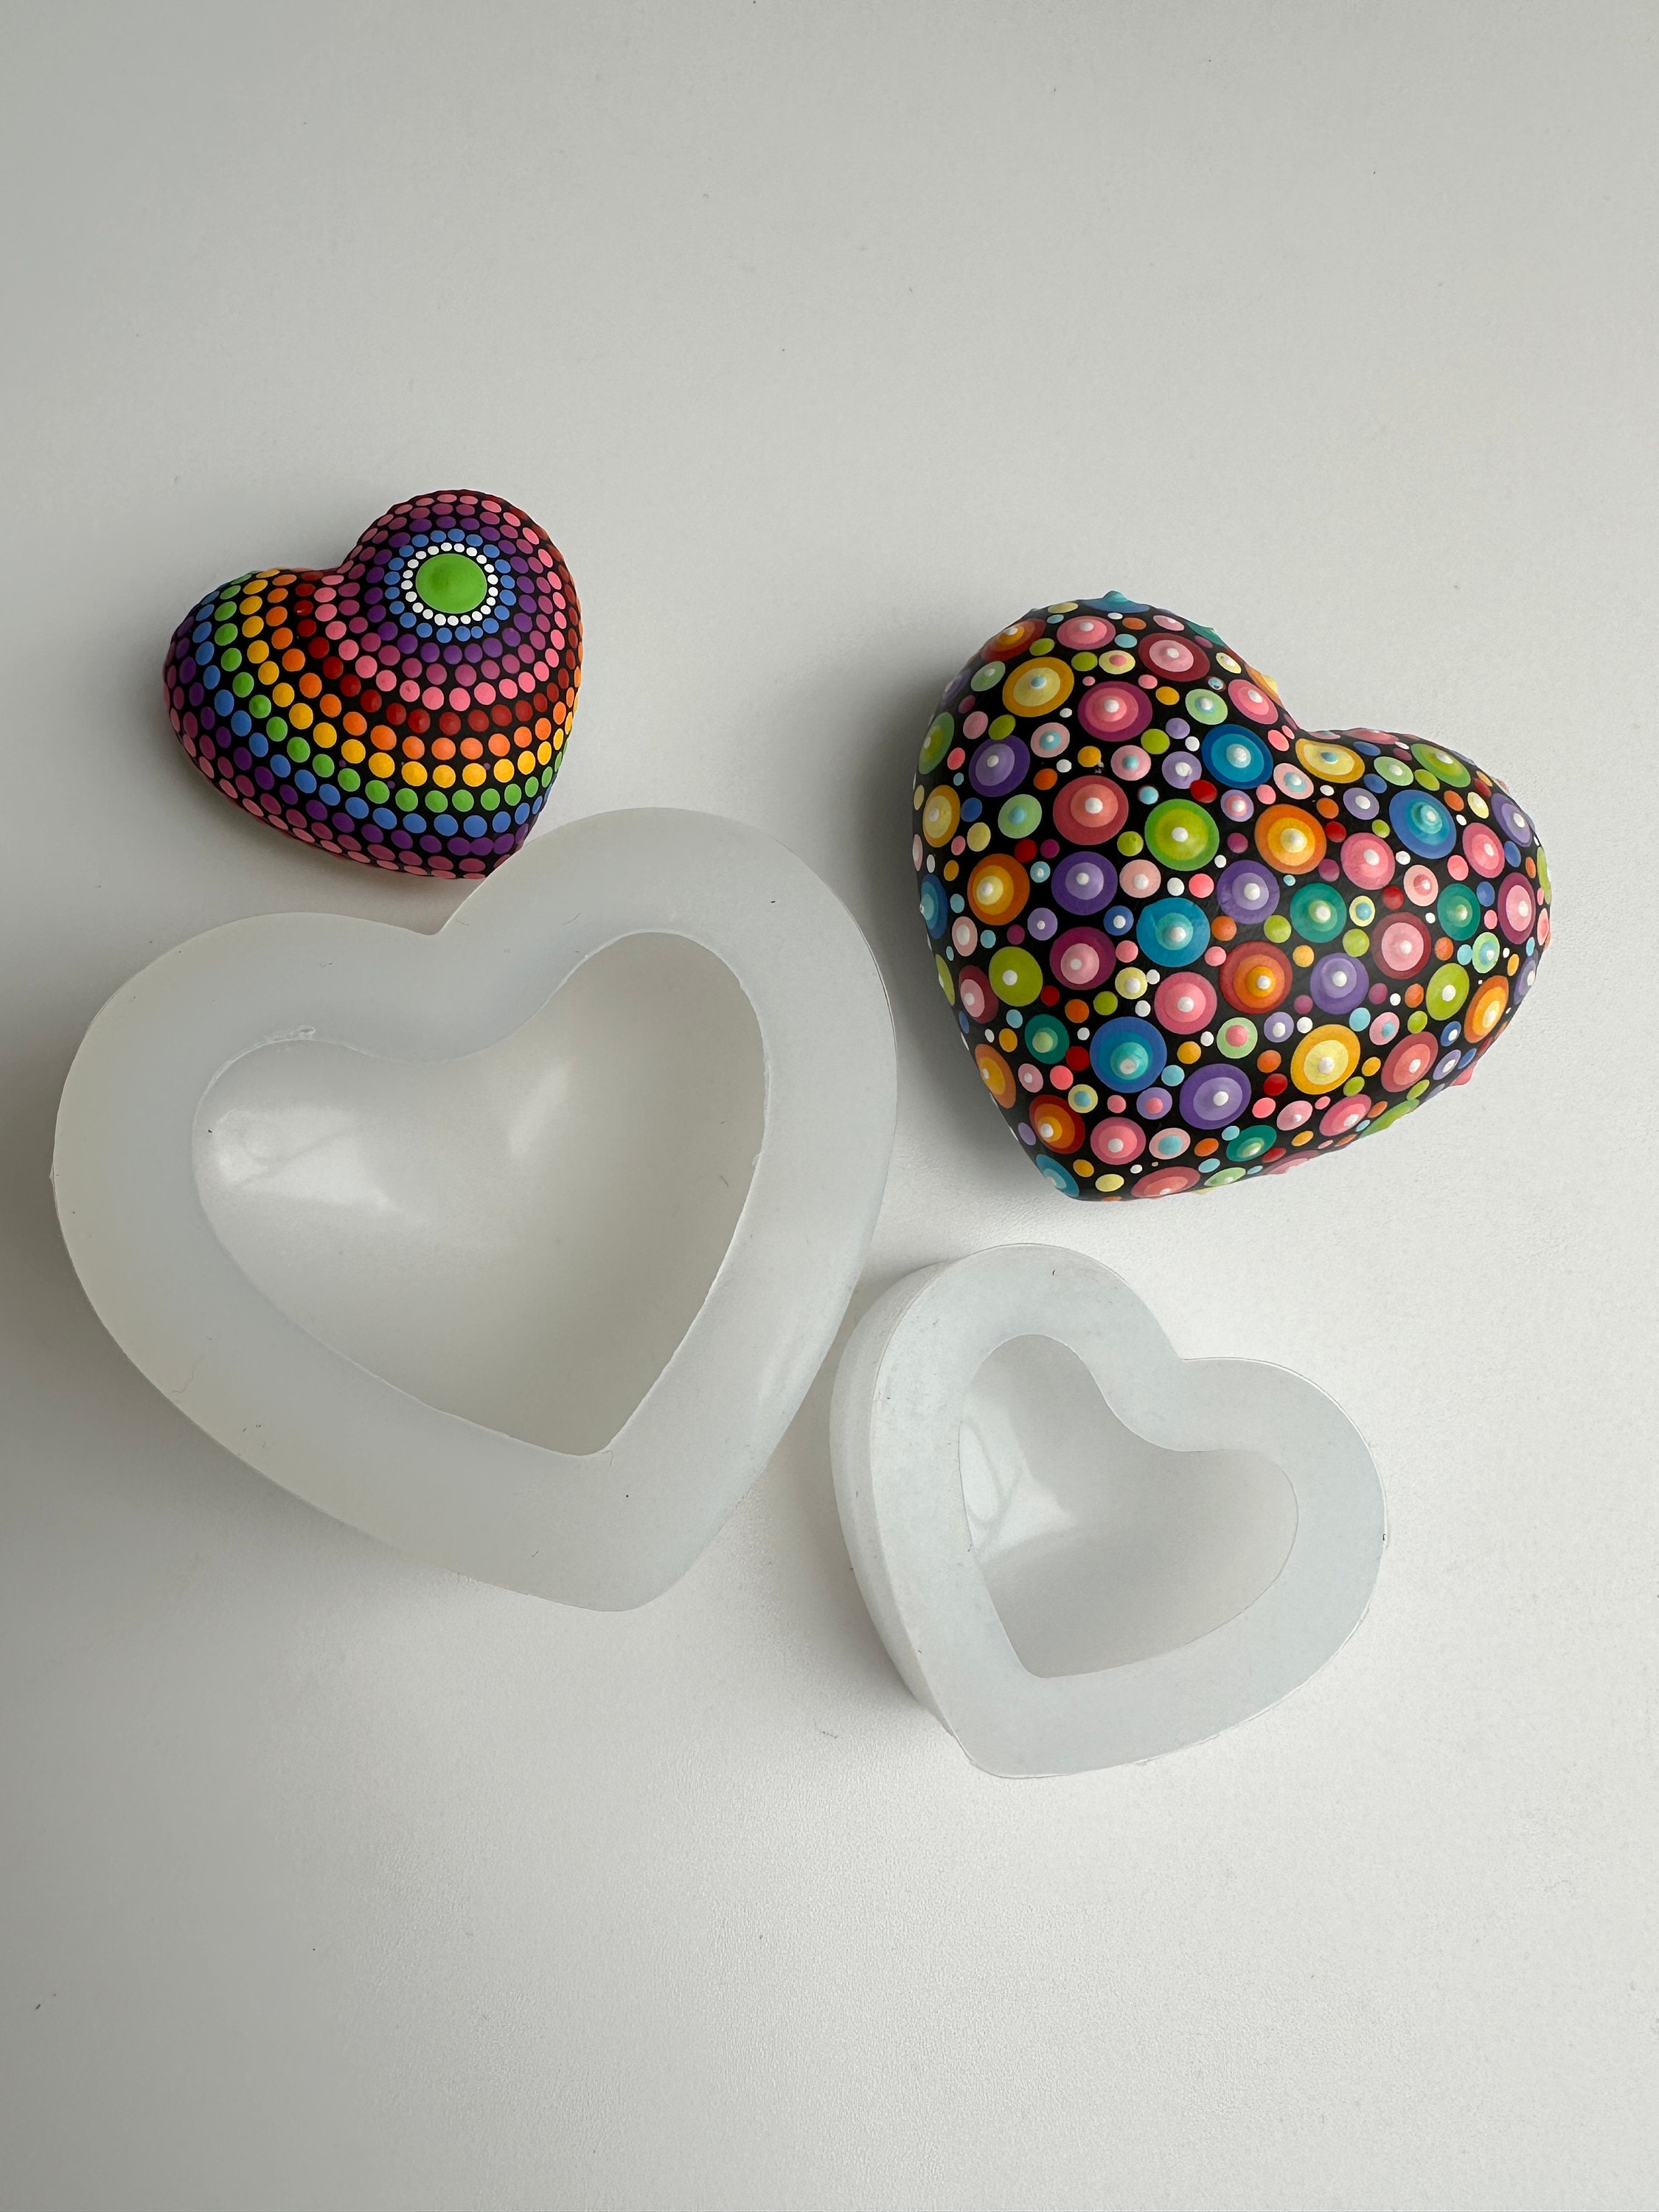 3D Heart Shape Case Silicone Mold,heart Resin Silicone Mould,craft